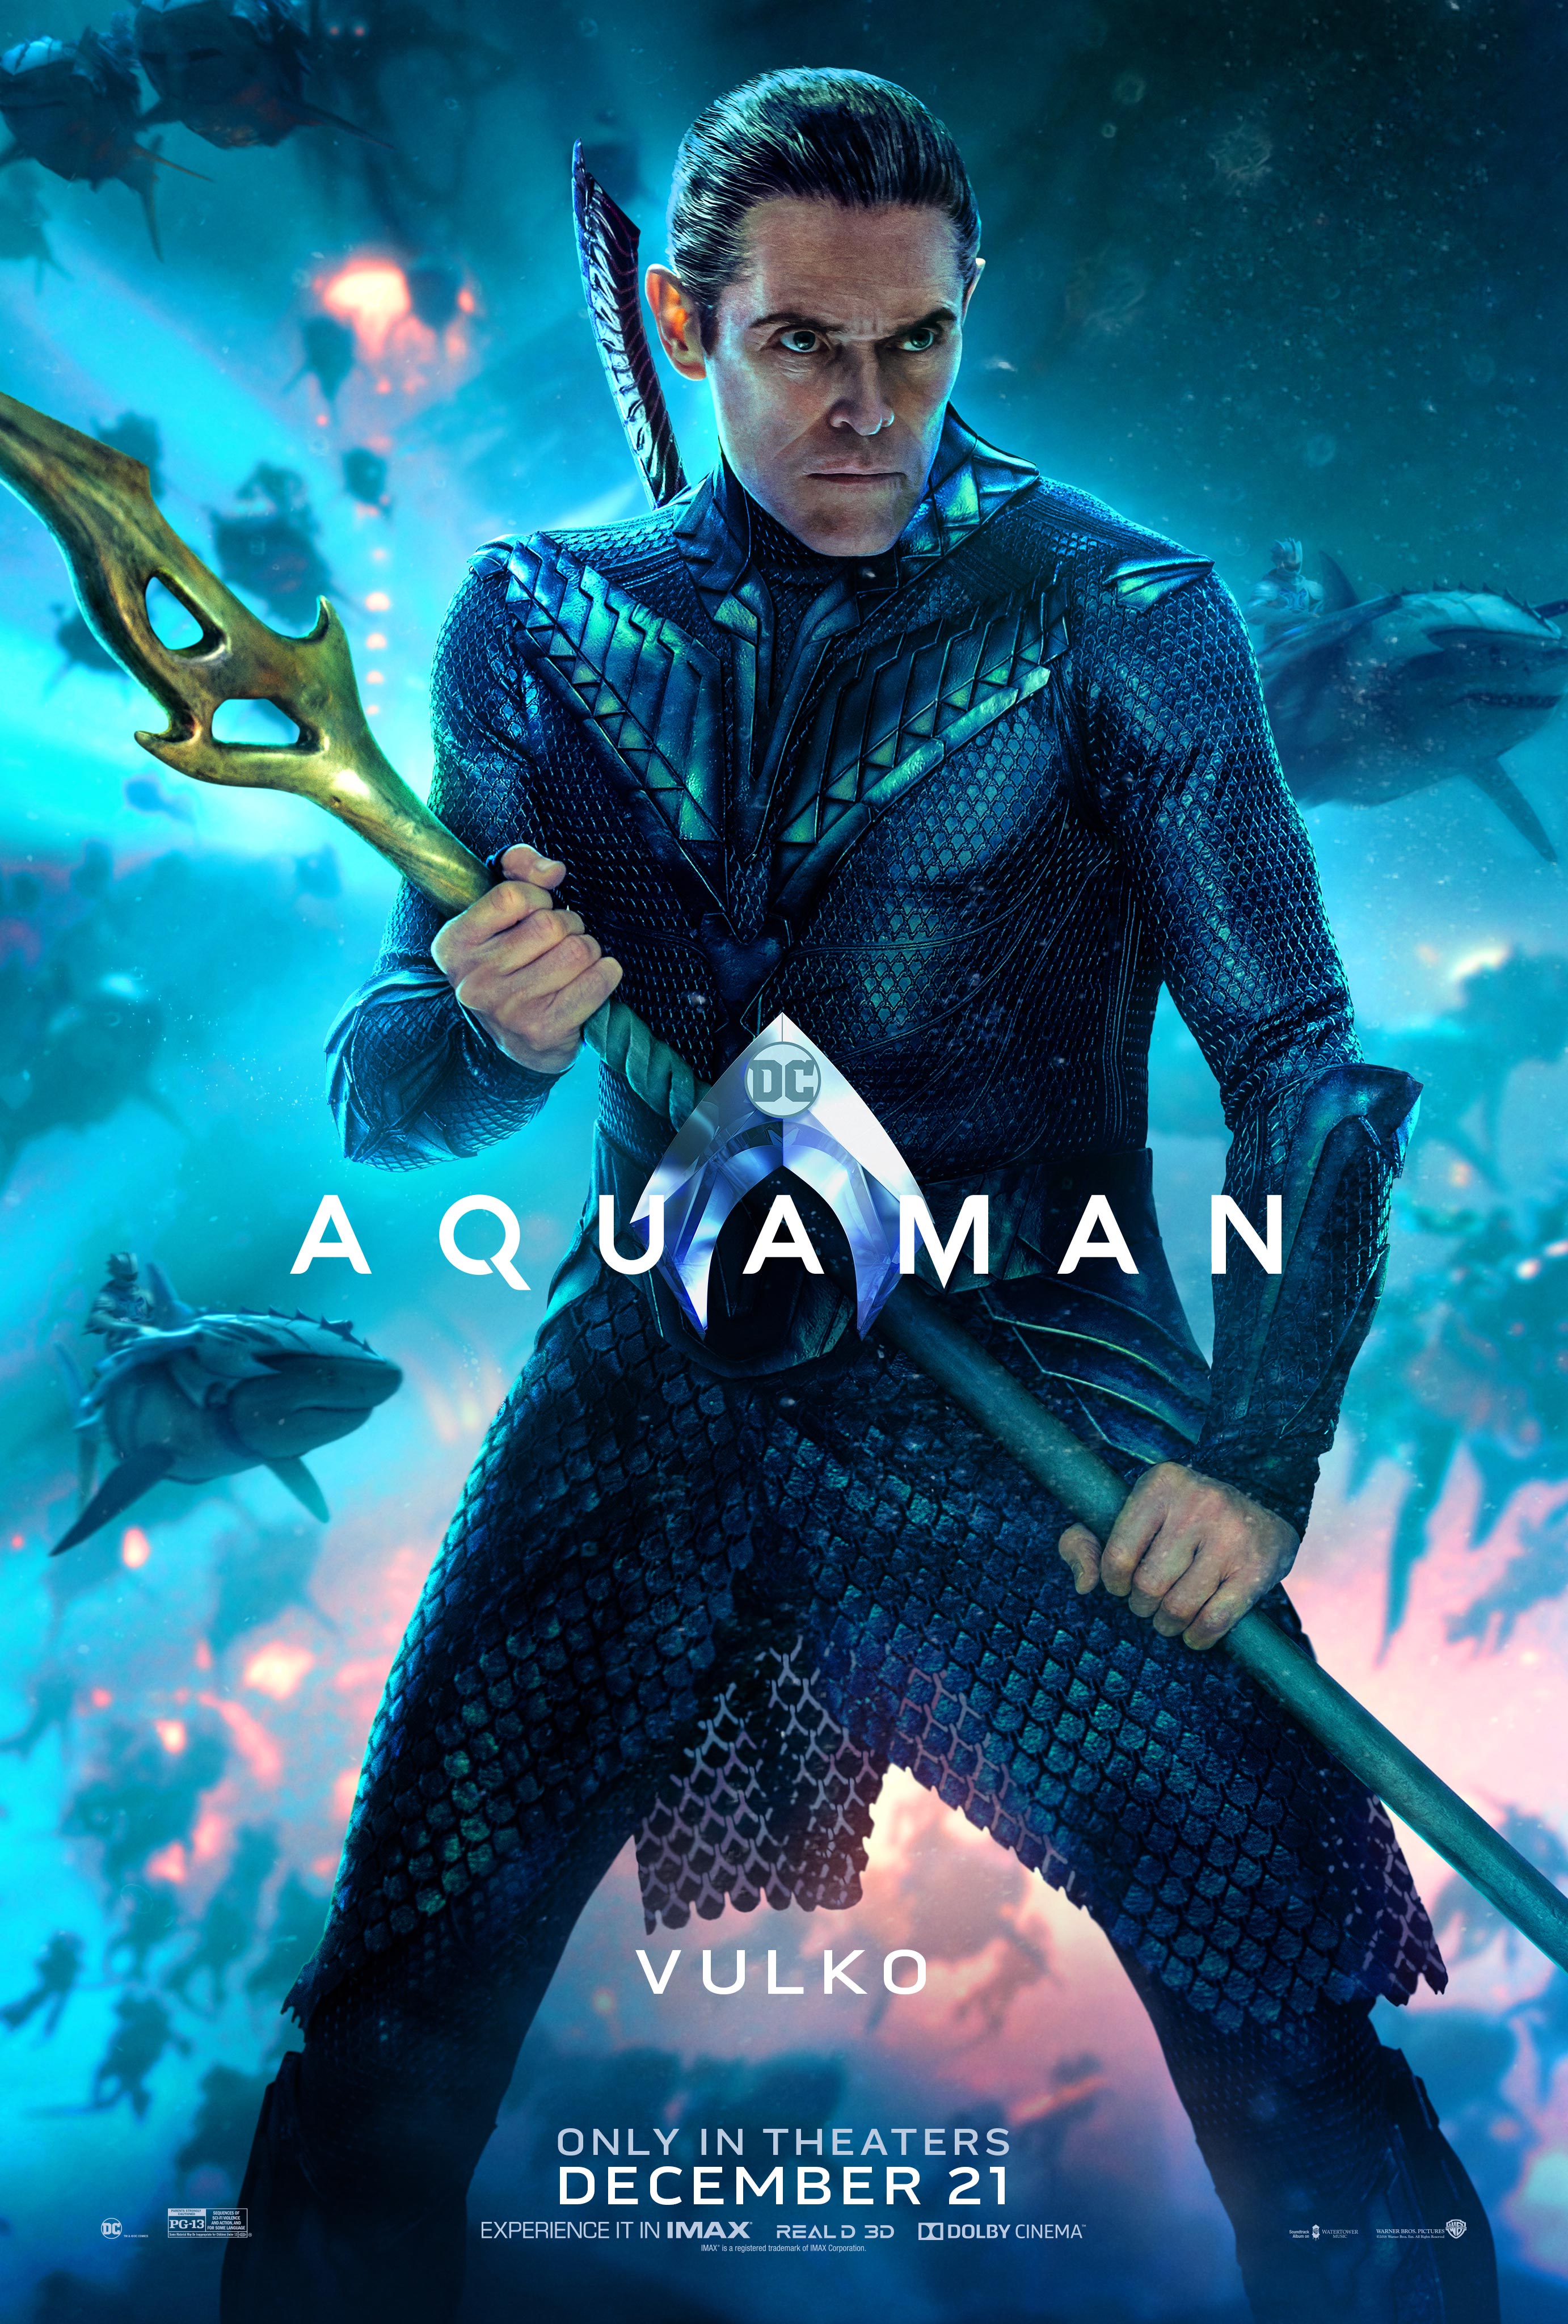 DCEU: DC extended universe image Aquaman (2018) Character Poster